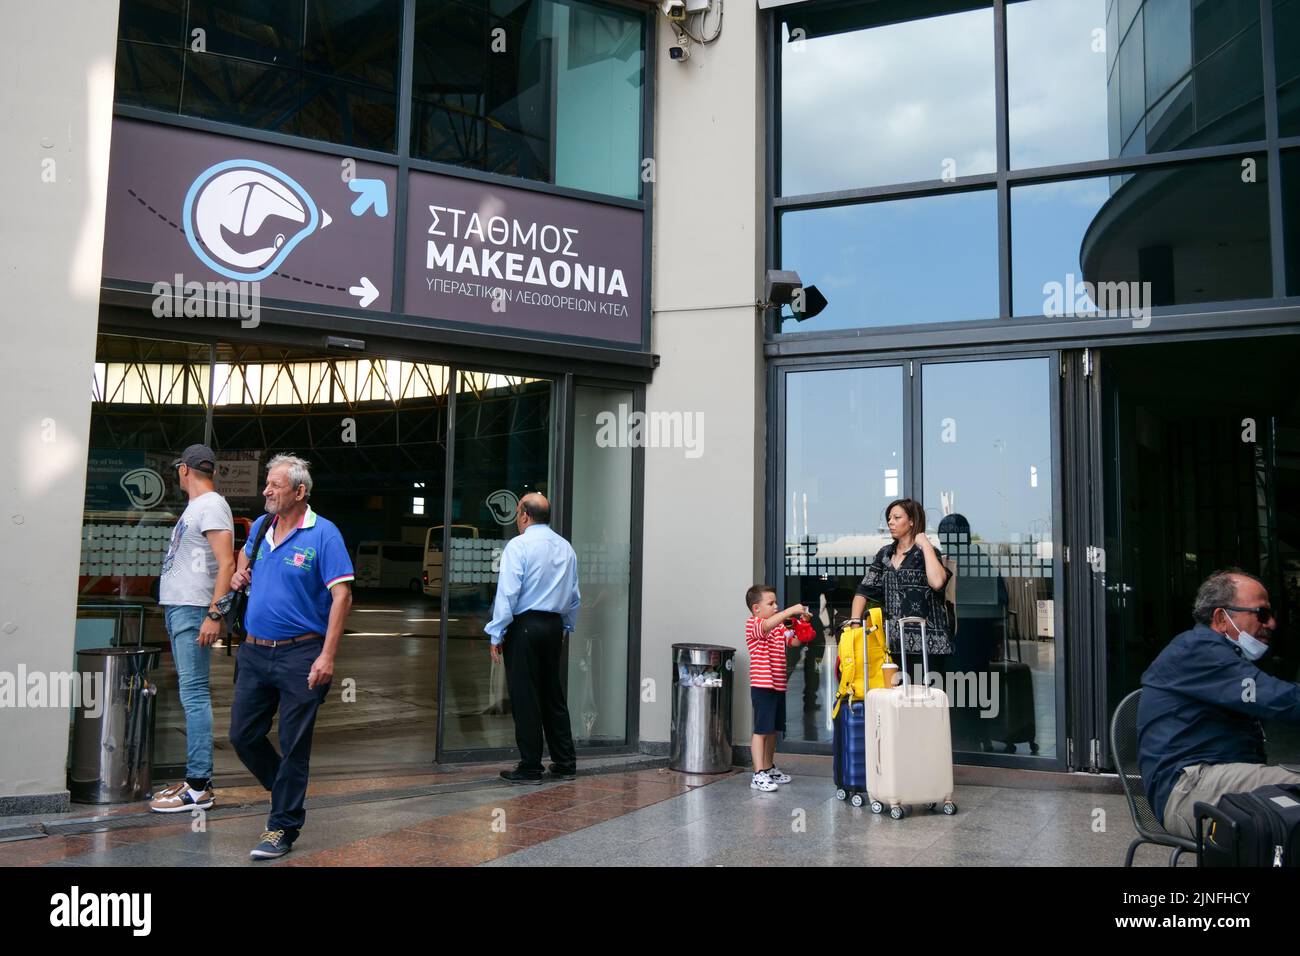 Travellers as seen at Ktel Makedonia bus station, Thessaloniki, Macedonia, North-Eastern Greece Stock Photo